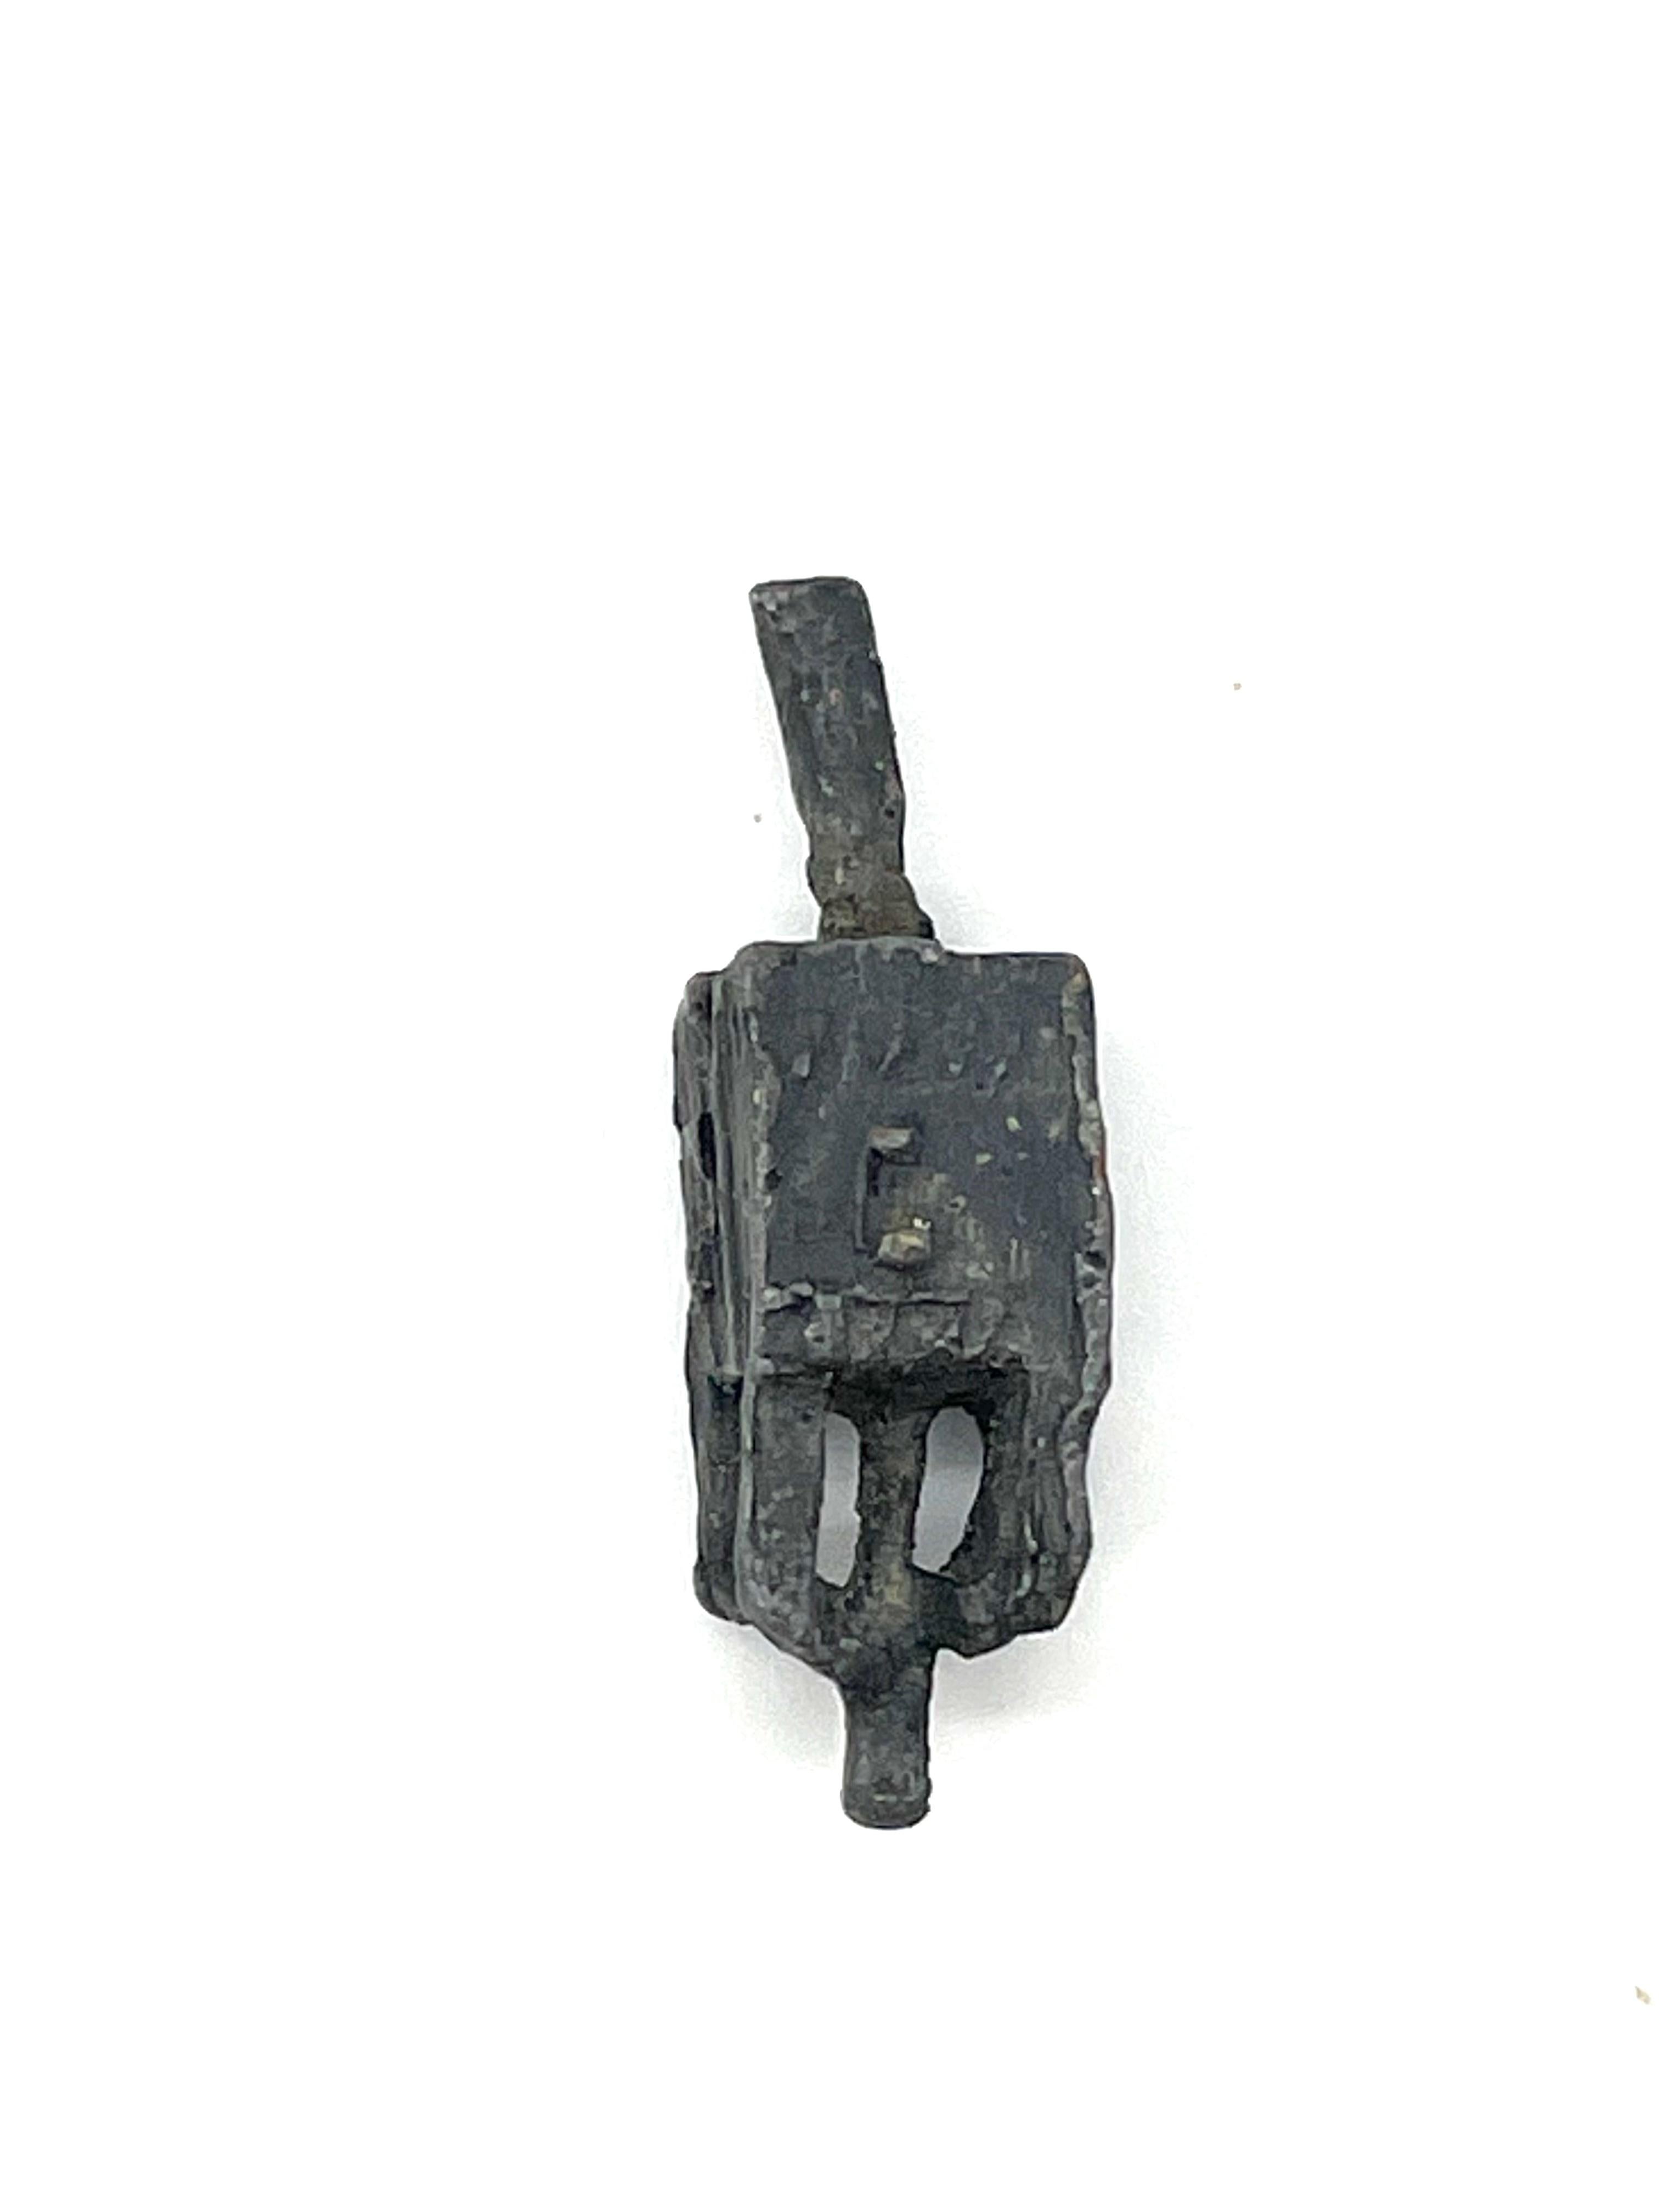 Cast lead Hanukkah dreidel, Poland, circa 1900. Found unearthed after roadwork construction began on Zgierska street in the city of Lodz during the 1950s. Elongated shape with overlay of dense grey cast. Distinctly bold Hebrew letters on each flank